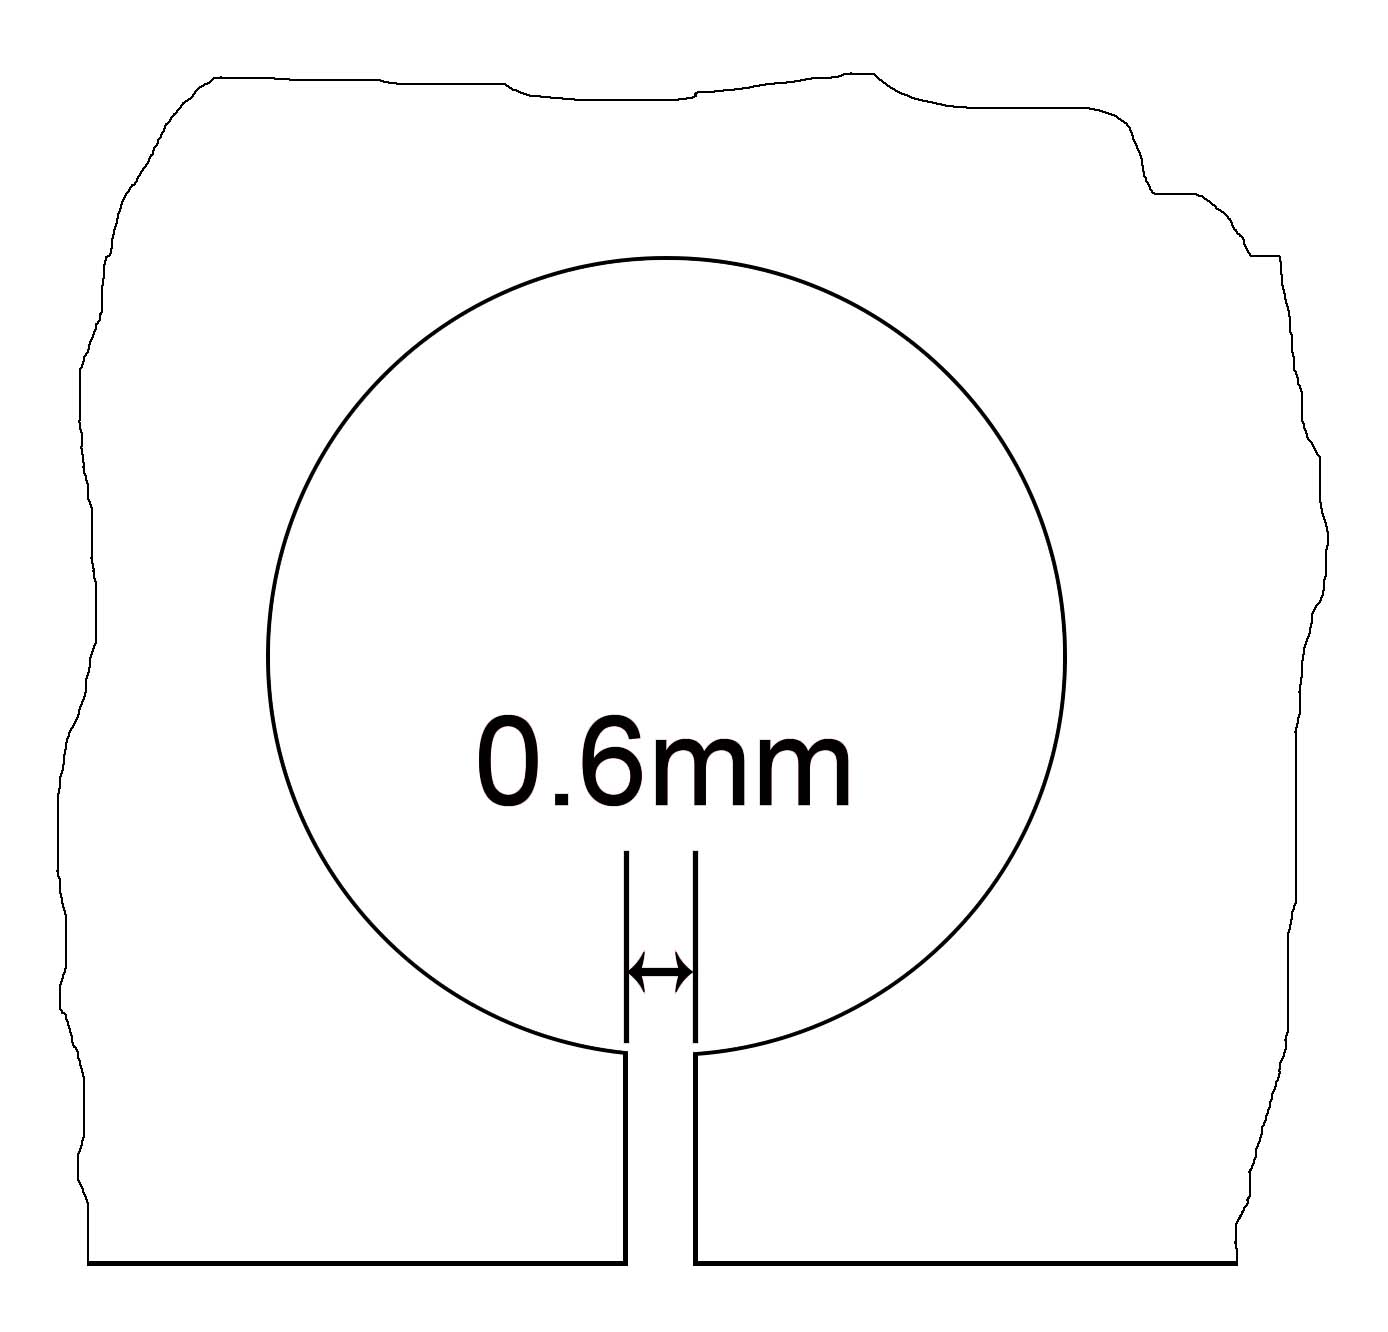 mechanical part with 0.6mm diameter